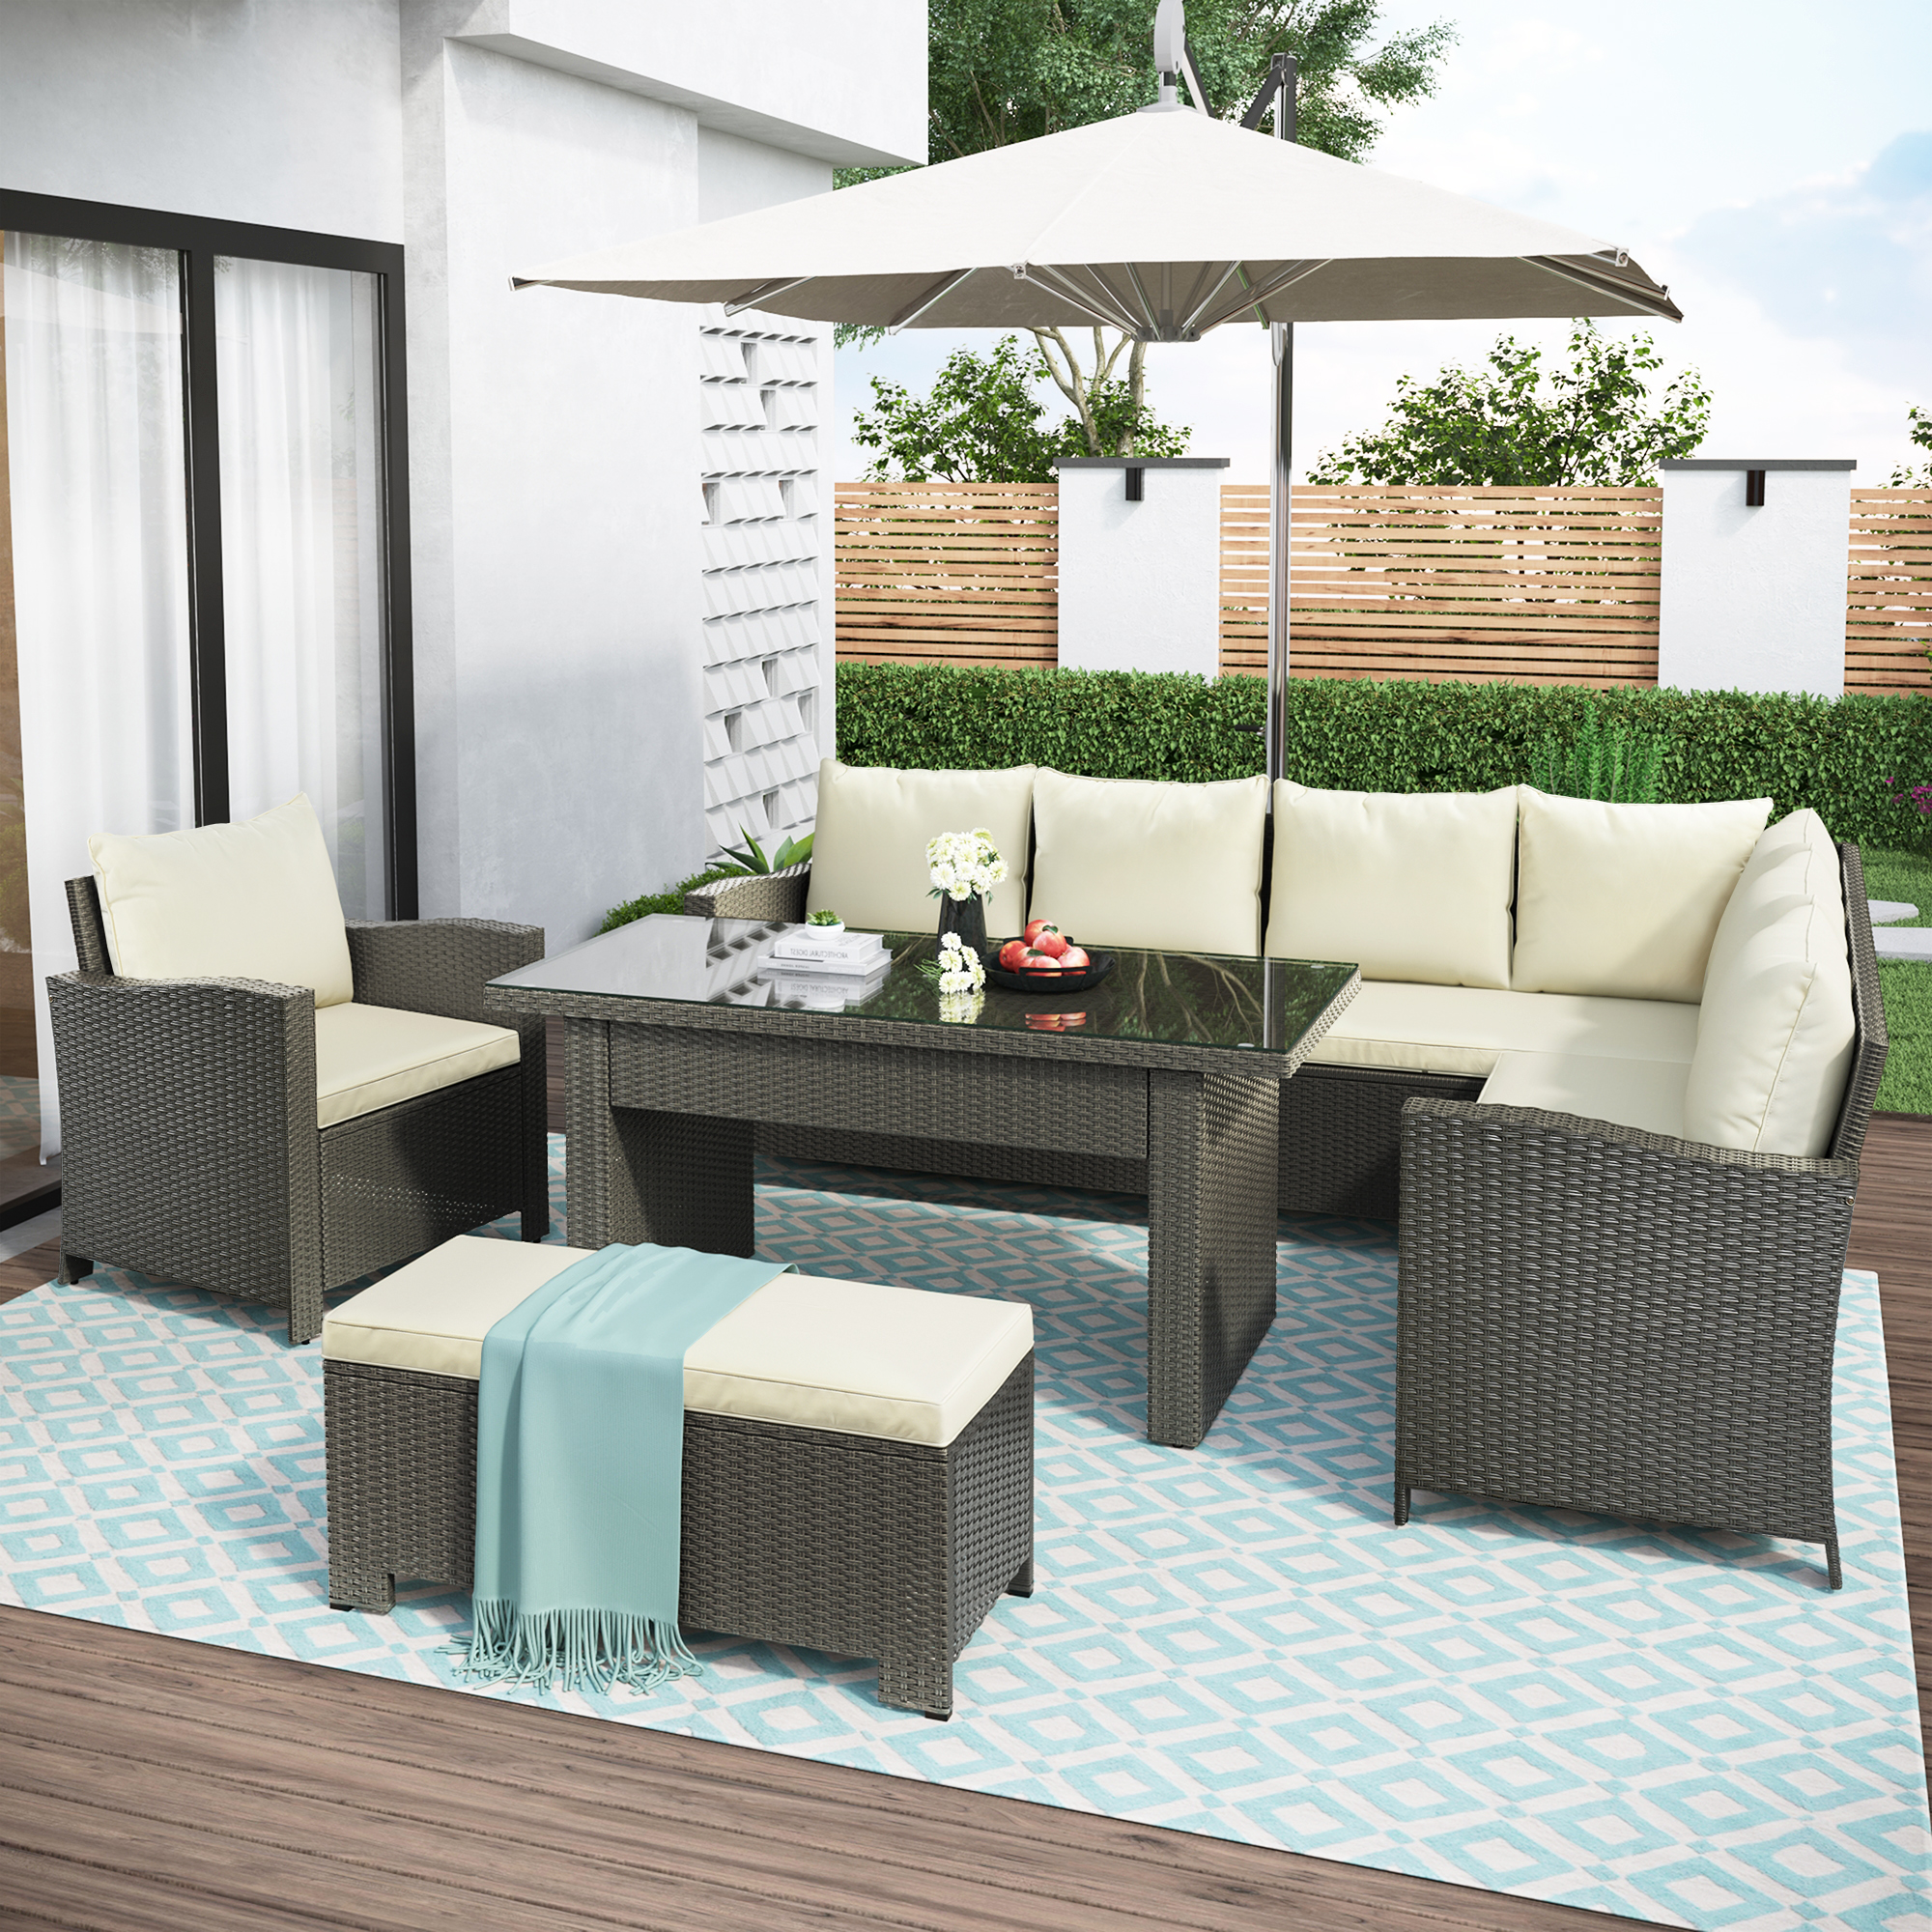 U_STYLE Patio Furniture Set, 6 Piece Outdoor Conversation Set, Dining Table Chair with Bench and Cushions